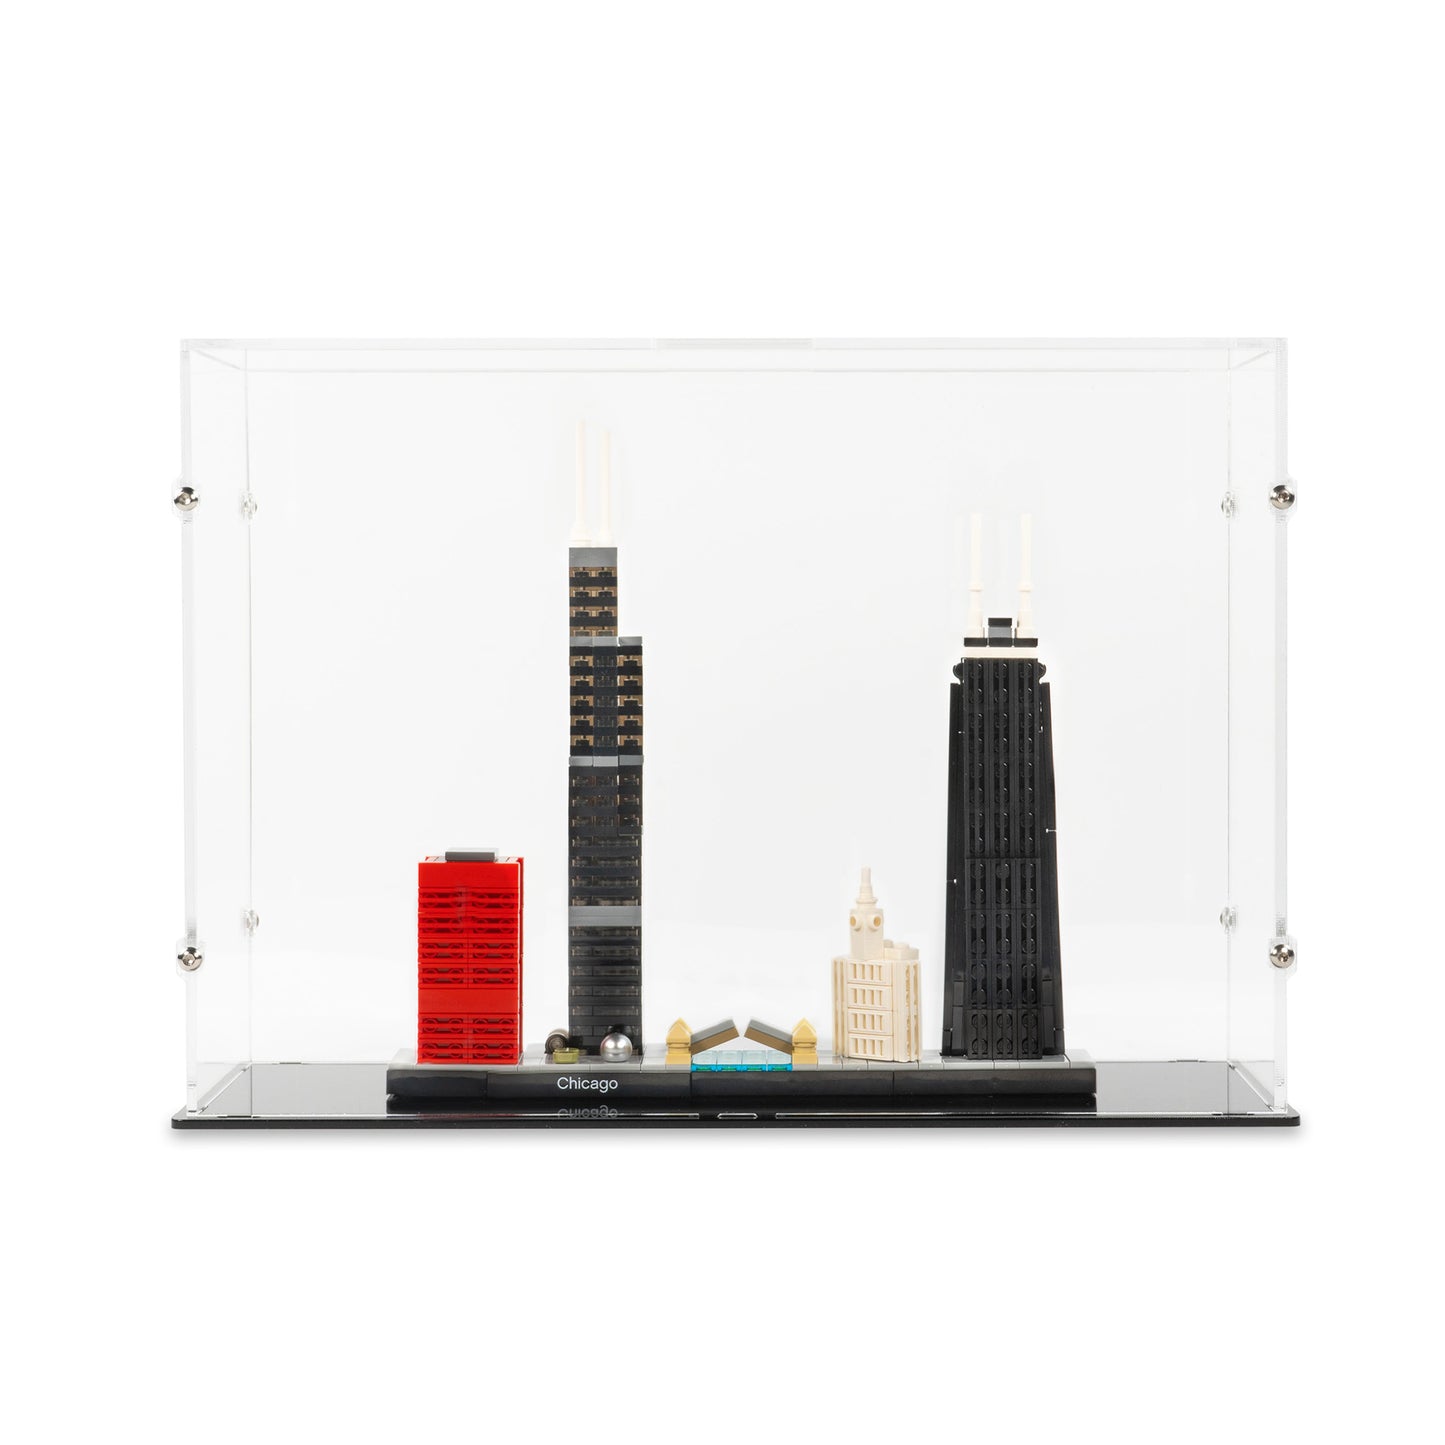 Front view of LEGO 21033 Chicago Display Case.